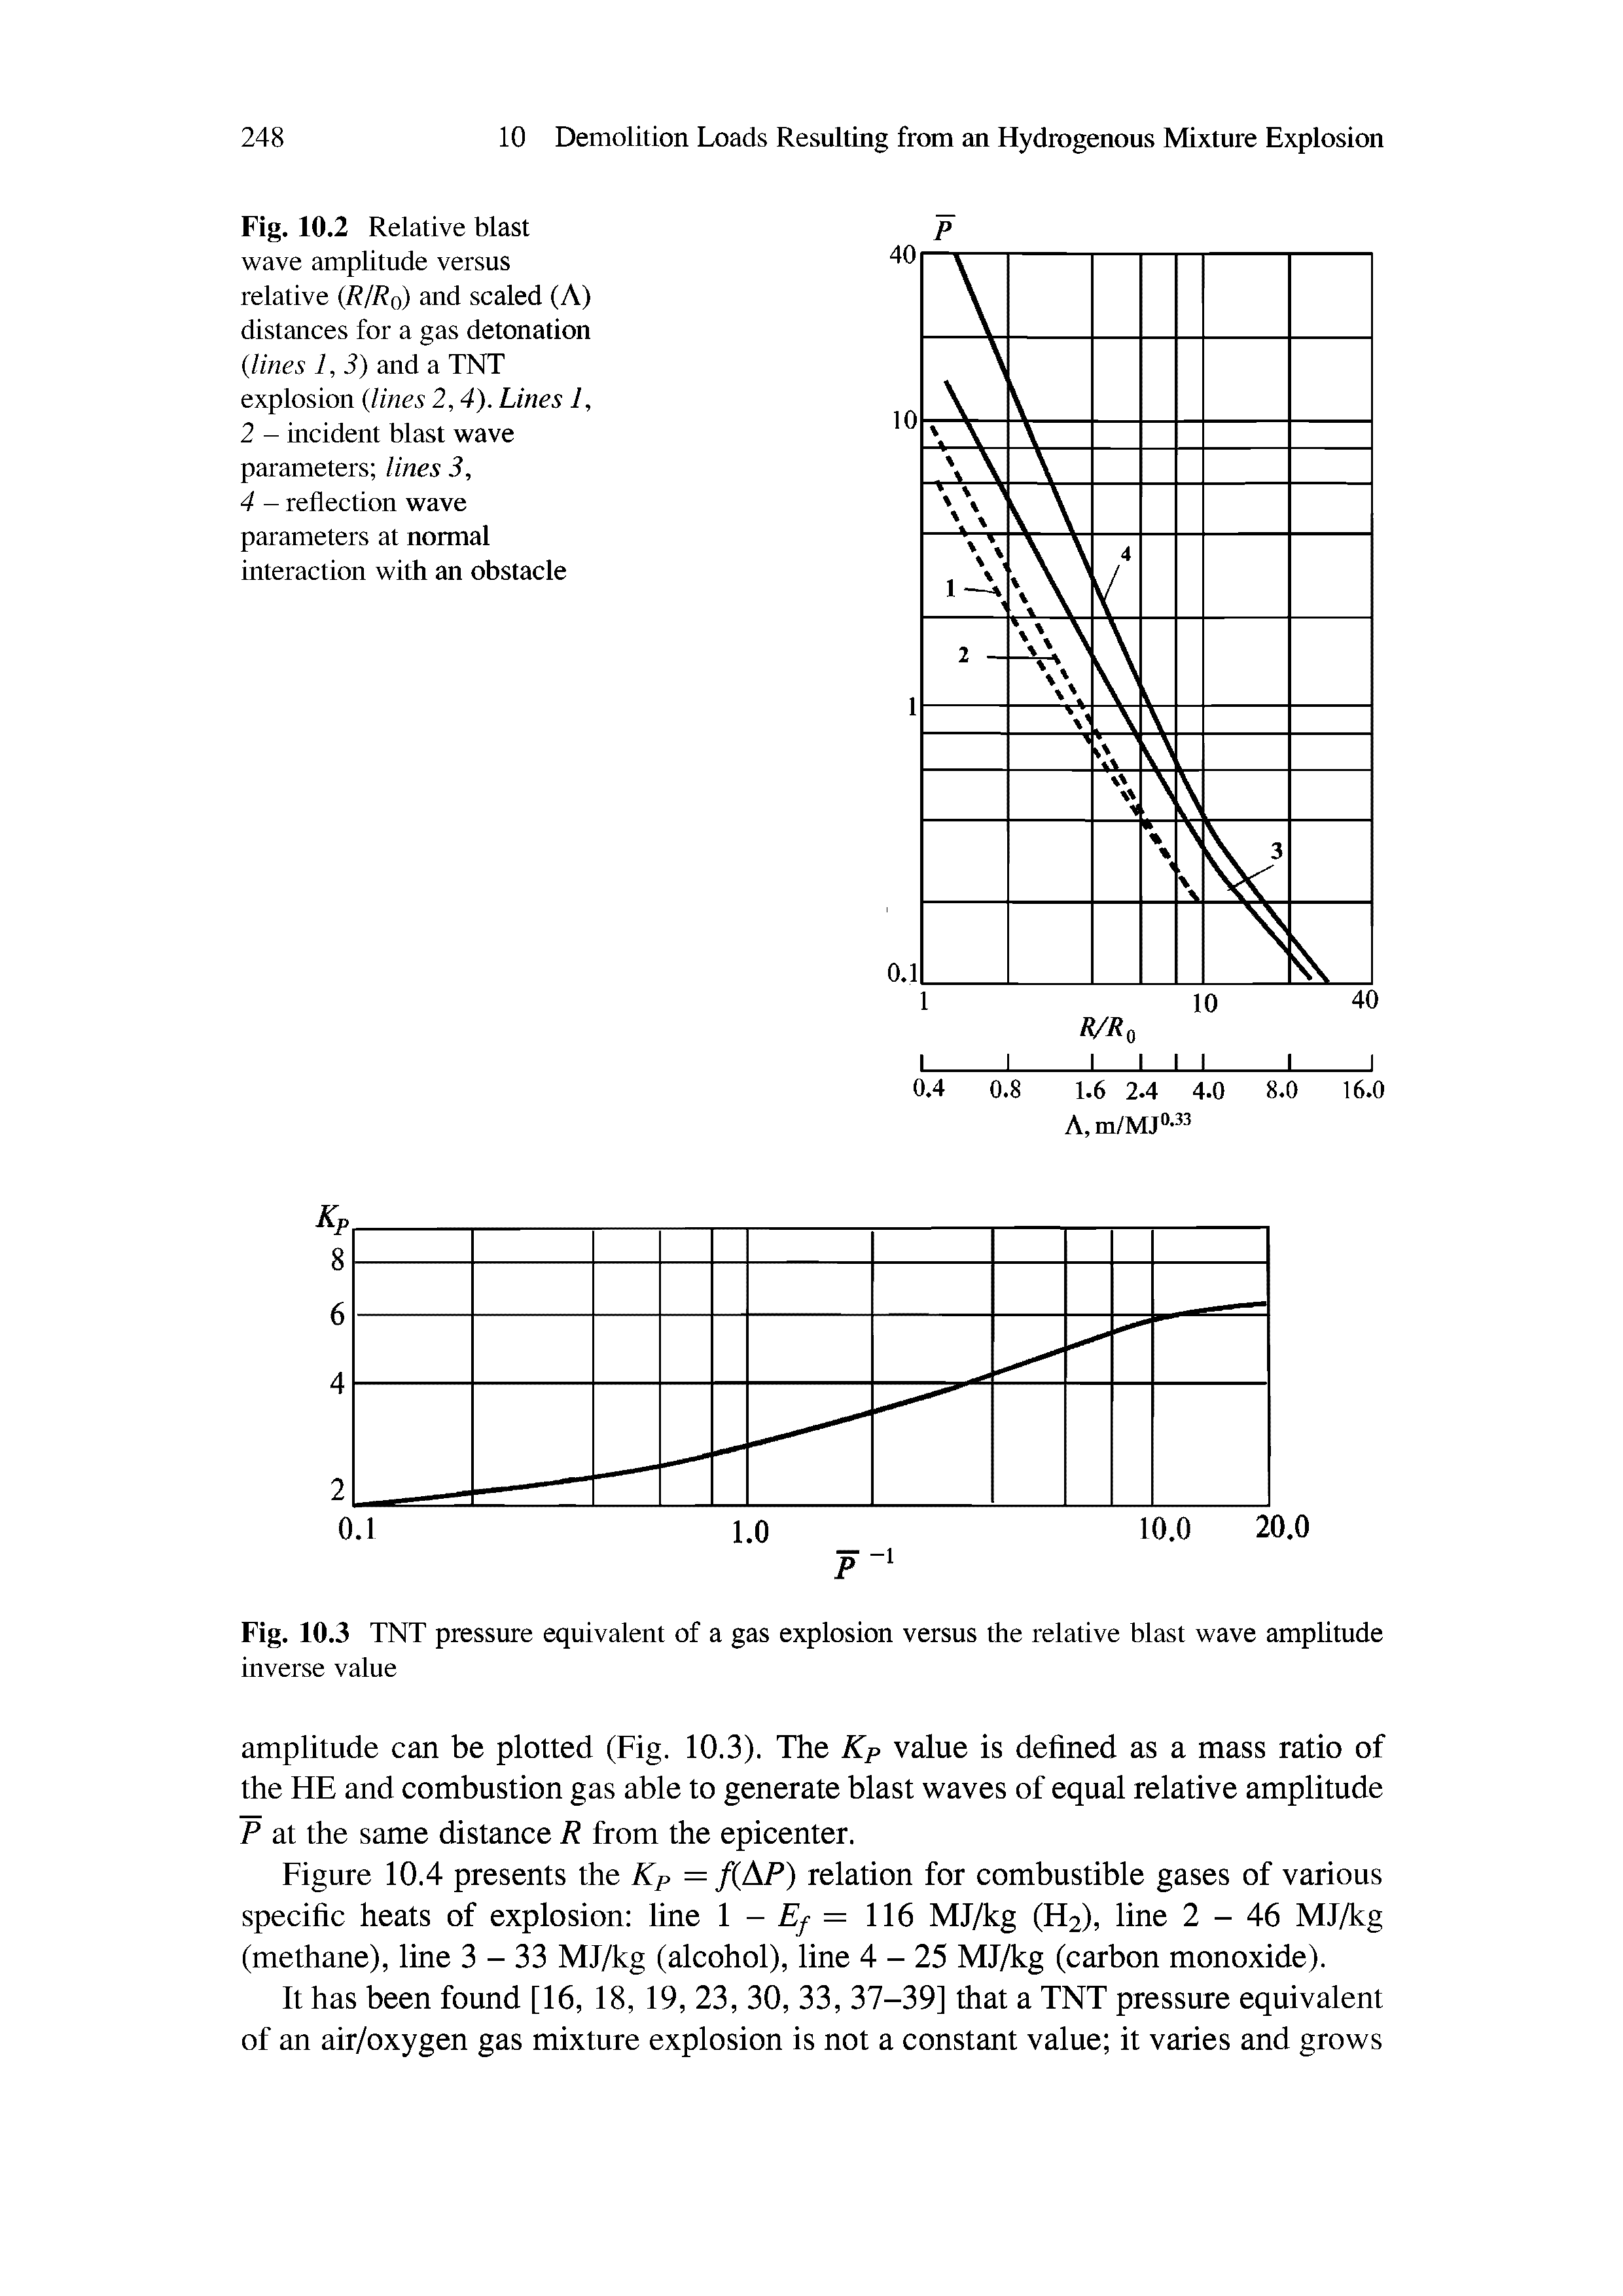 Fig. 10.2 Relative blast wave amplitude versus relative (R/Rq) and scaled (A) distances for a gas detonation (lines 1, 3) and a TNT explosion (lines 2,4). Lines I, 2 - incident blast wave parameters lines 3,...